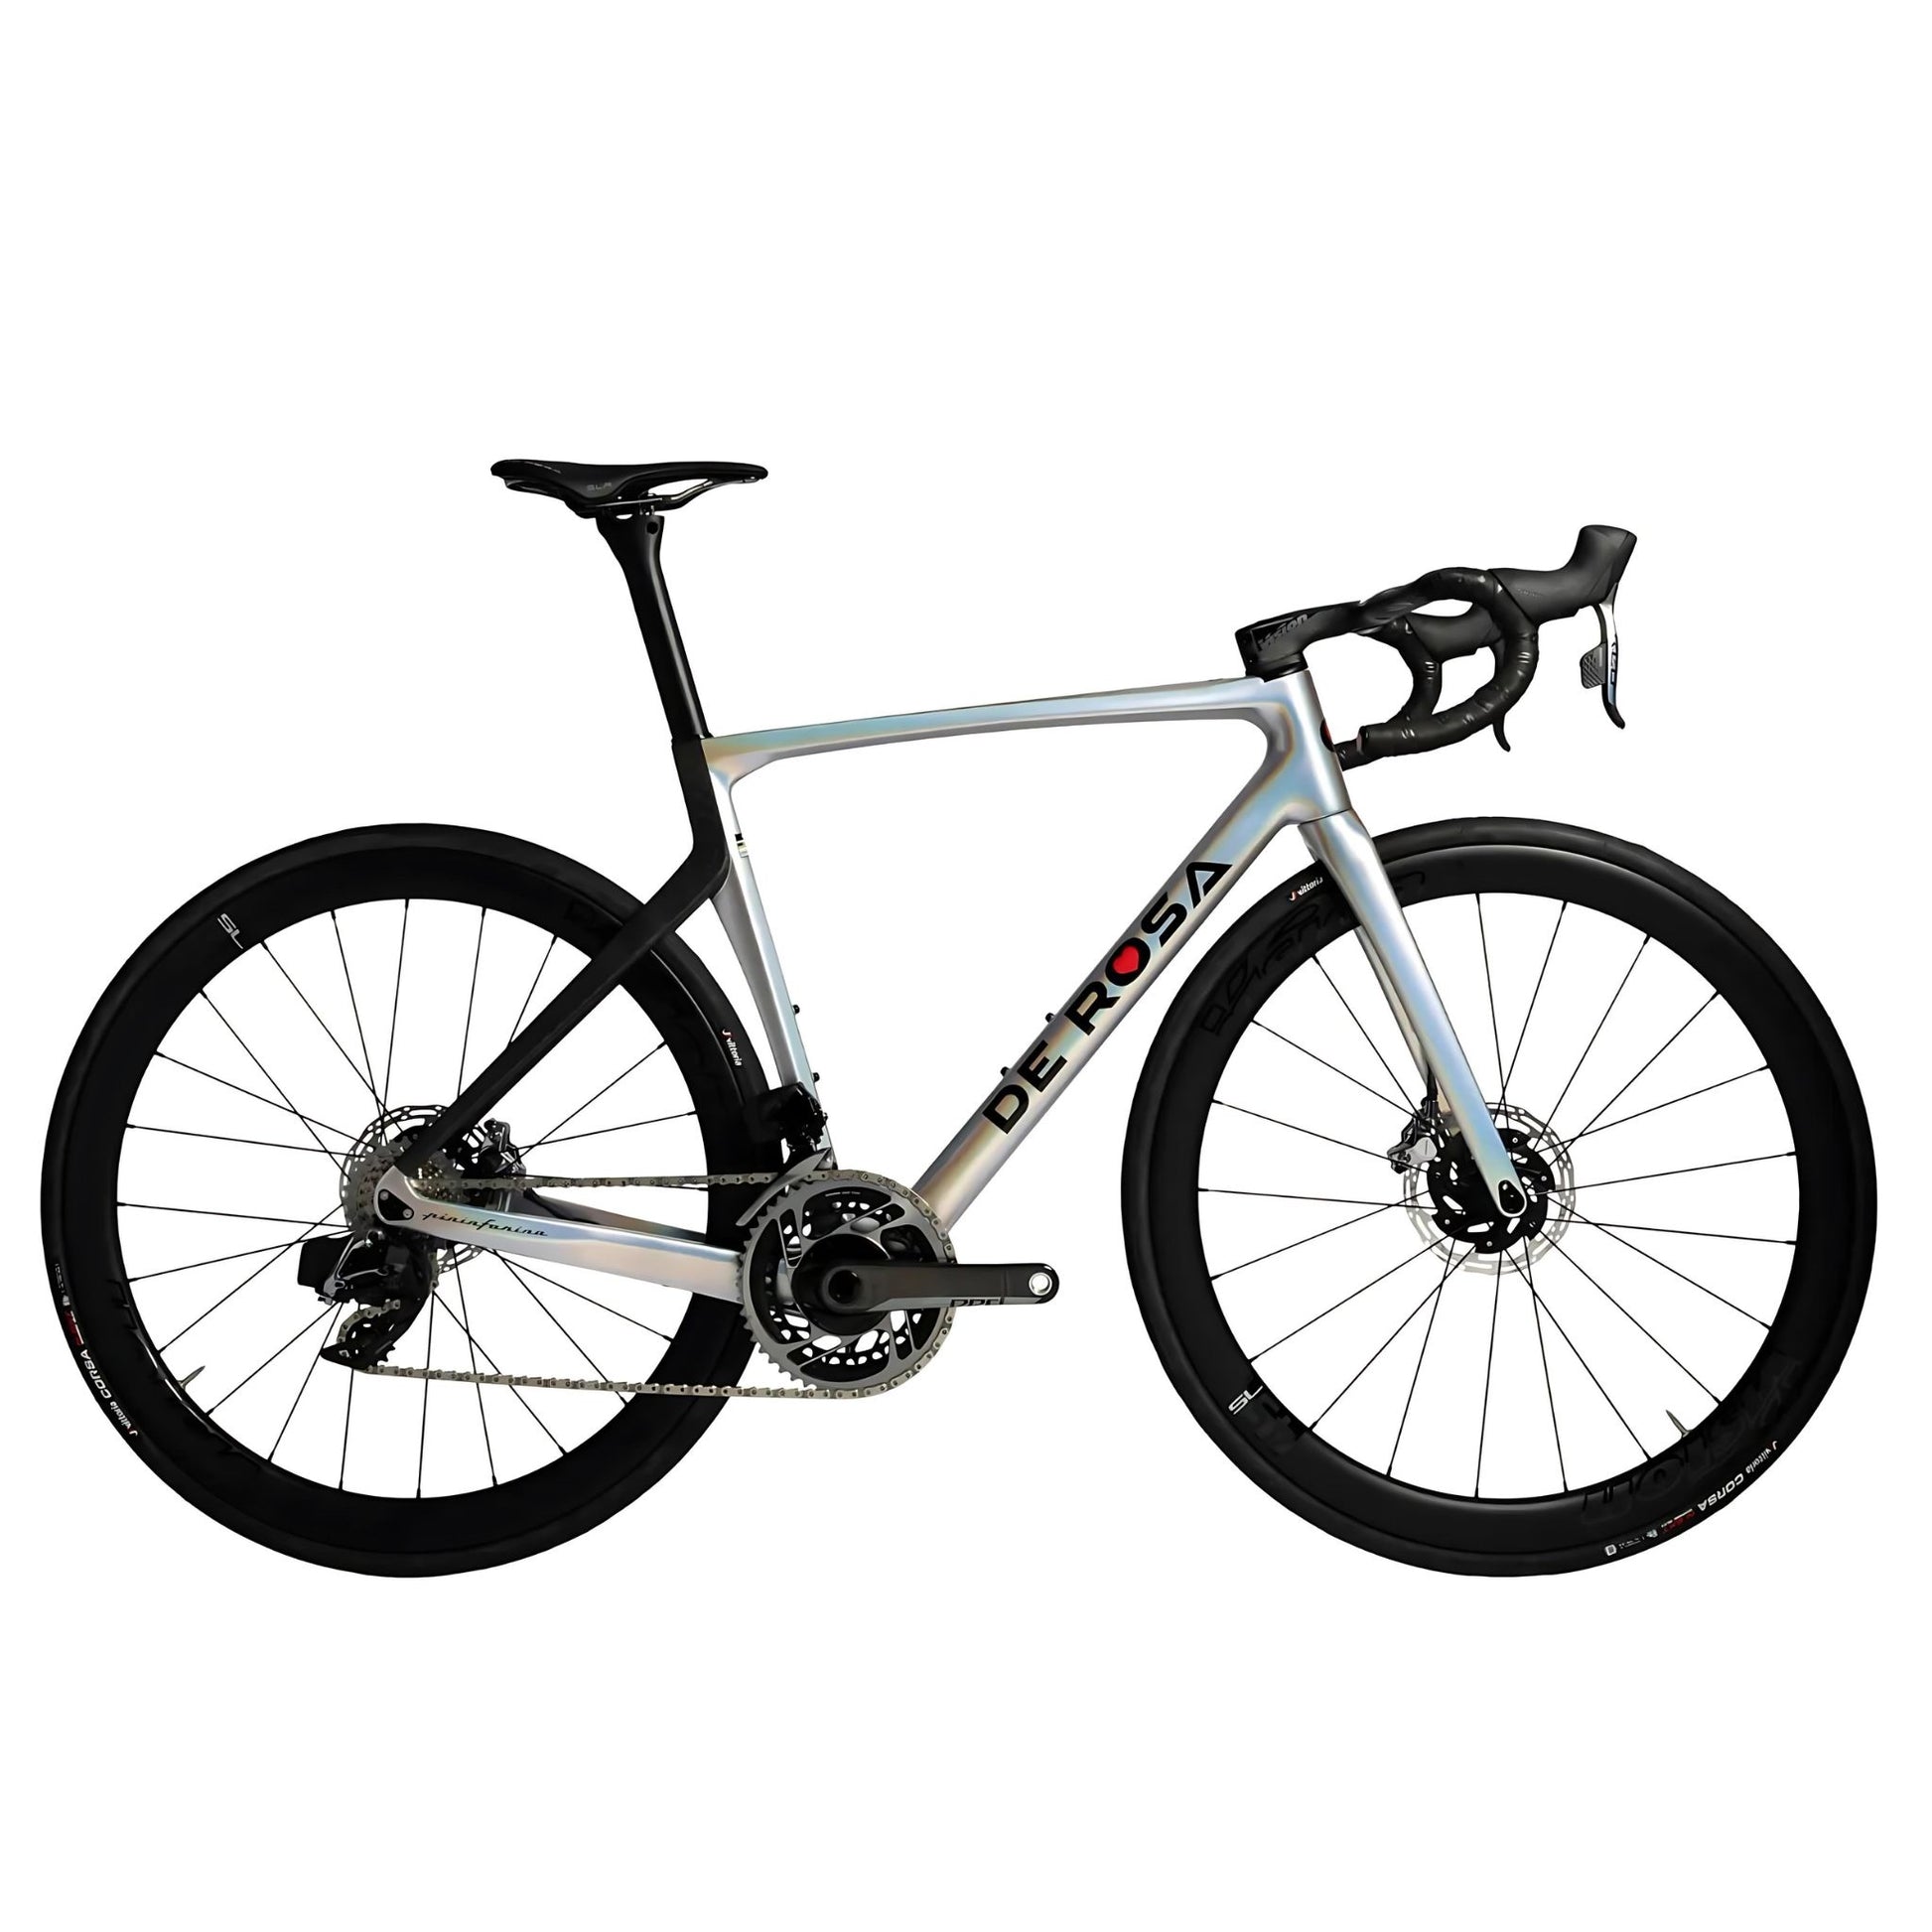 De Rosa 70 complete bike in silver with reflective surfaces